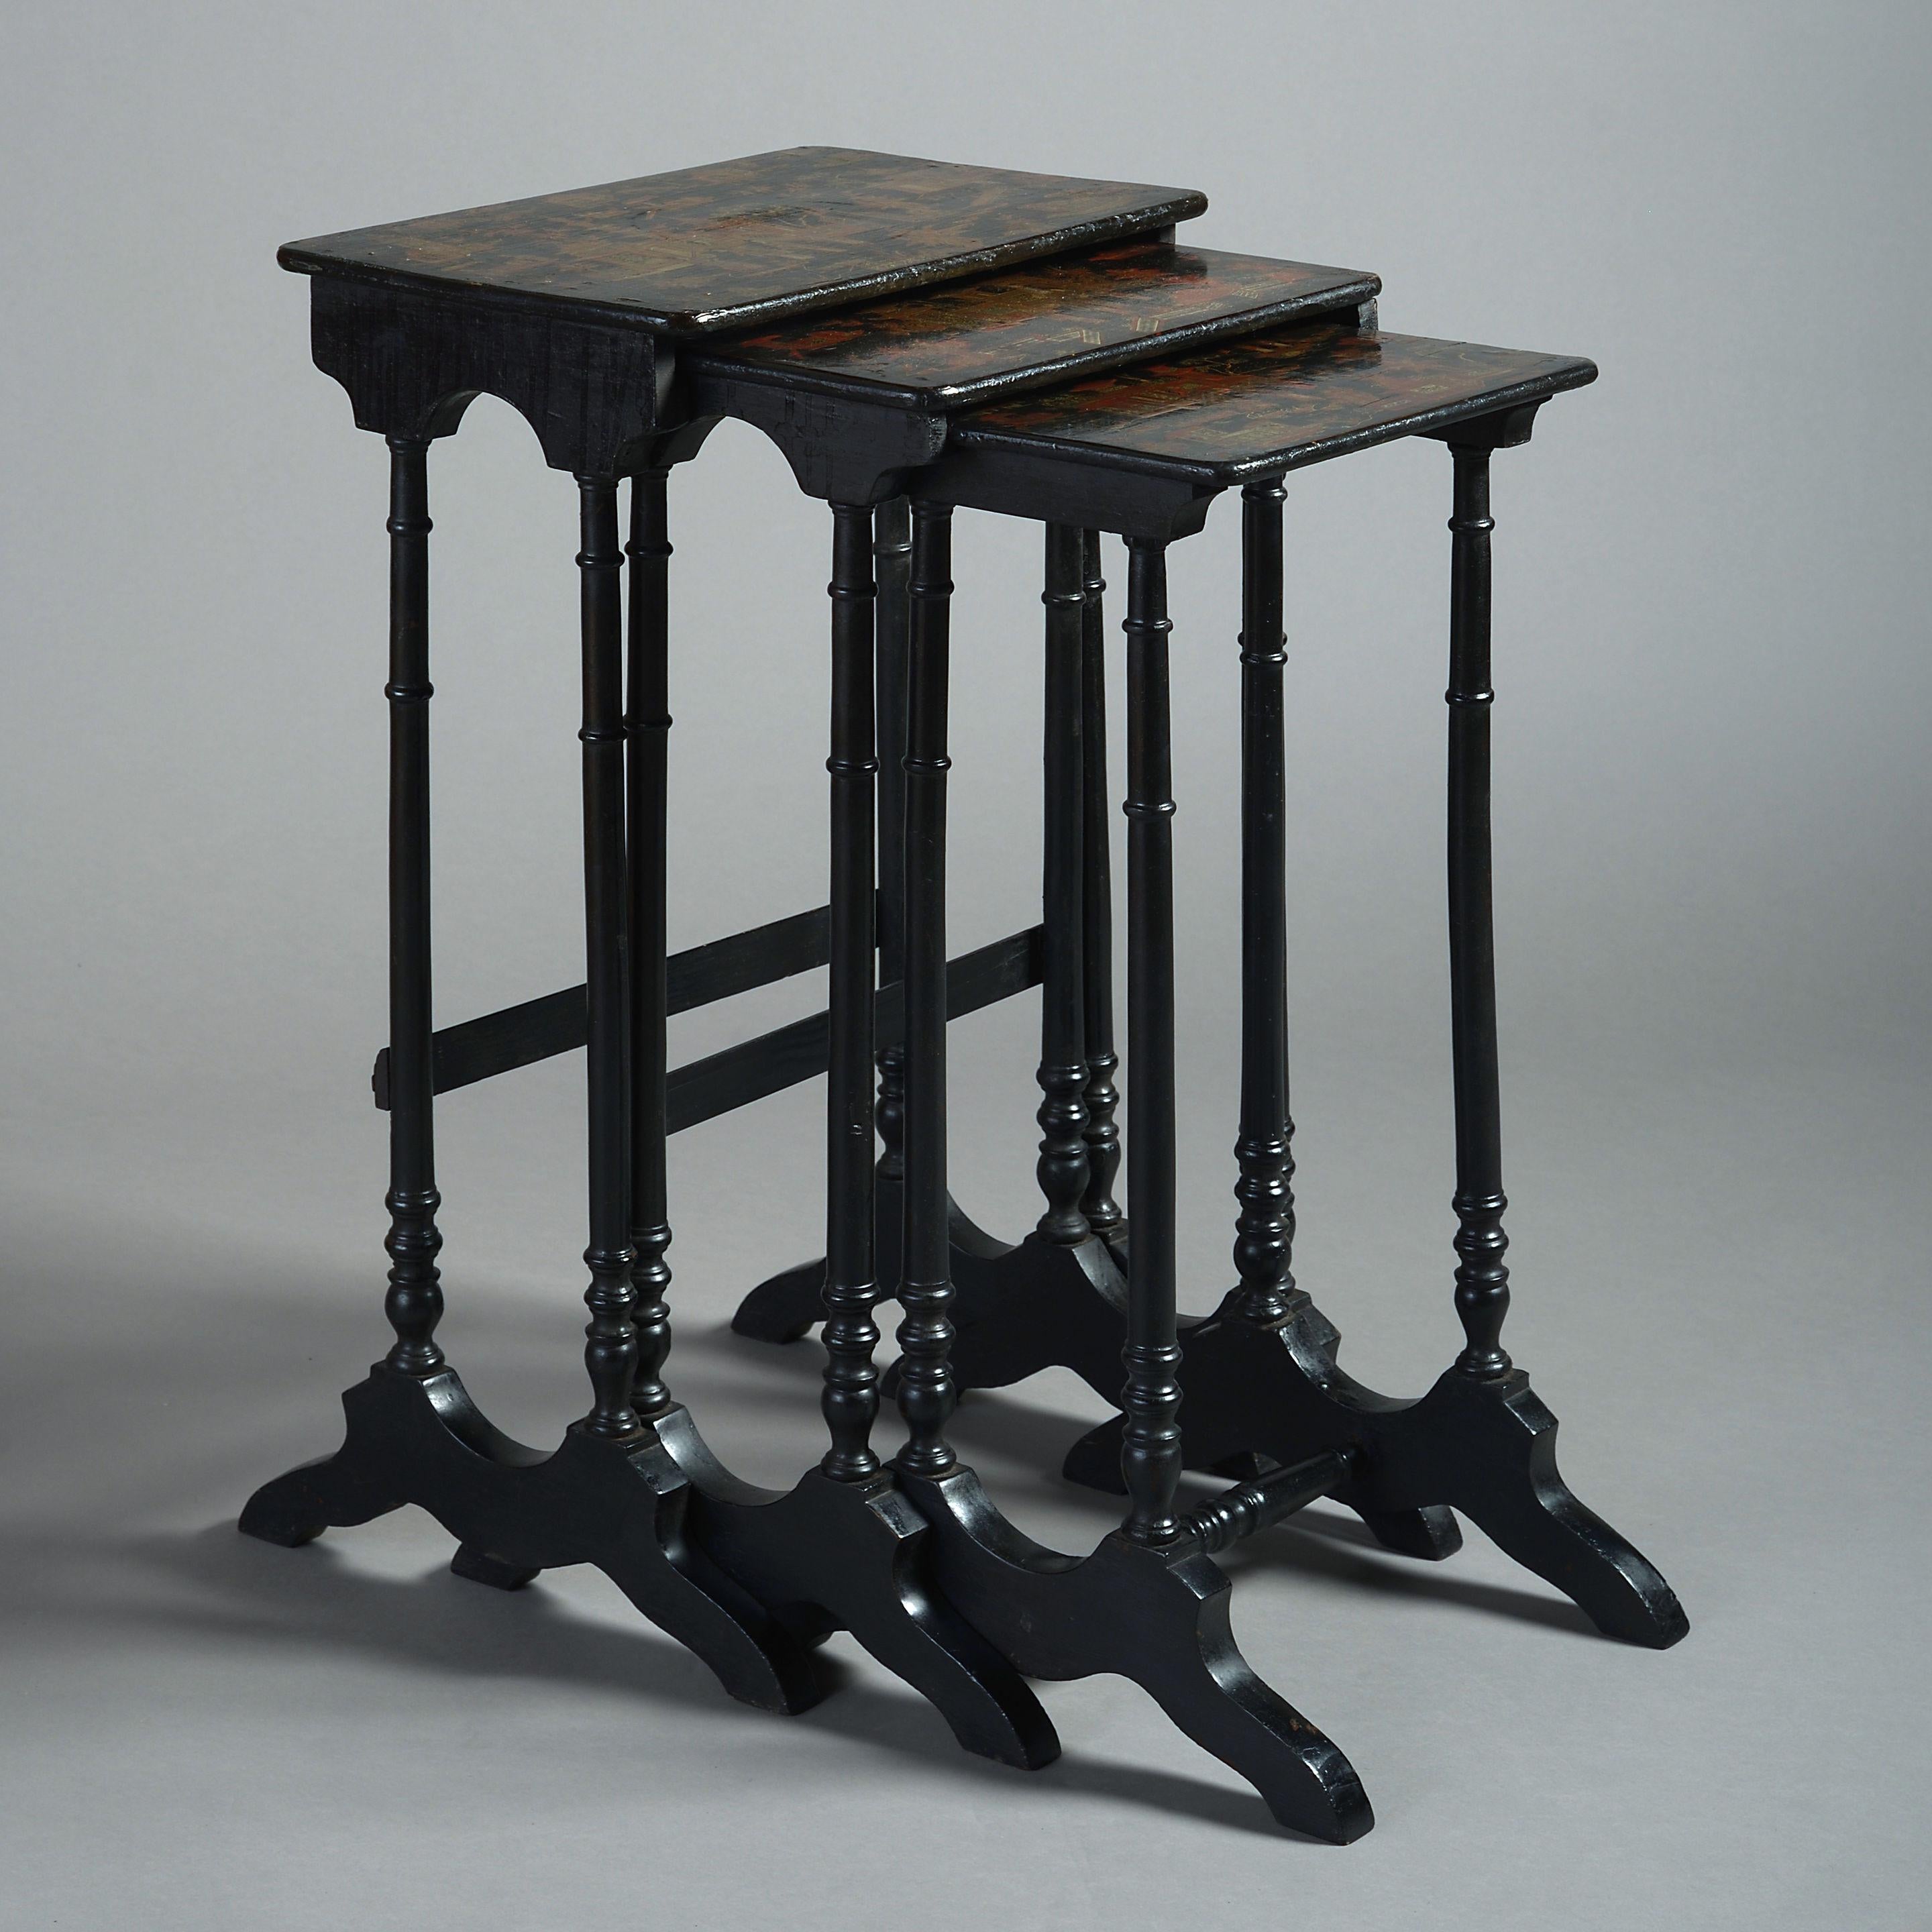 An early 19th century Regency period chinoiserie black and gilt lacquer nest of three tables.